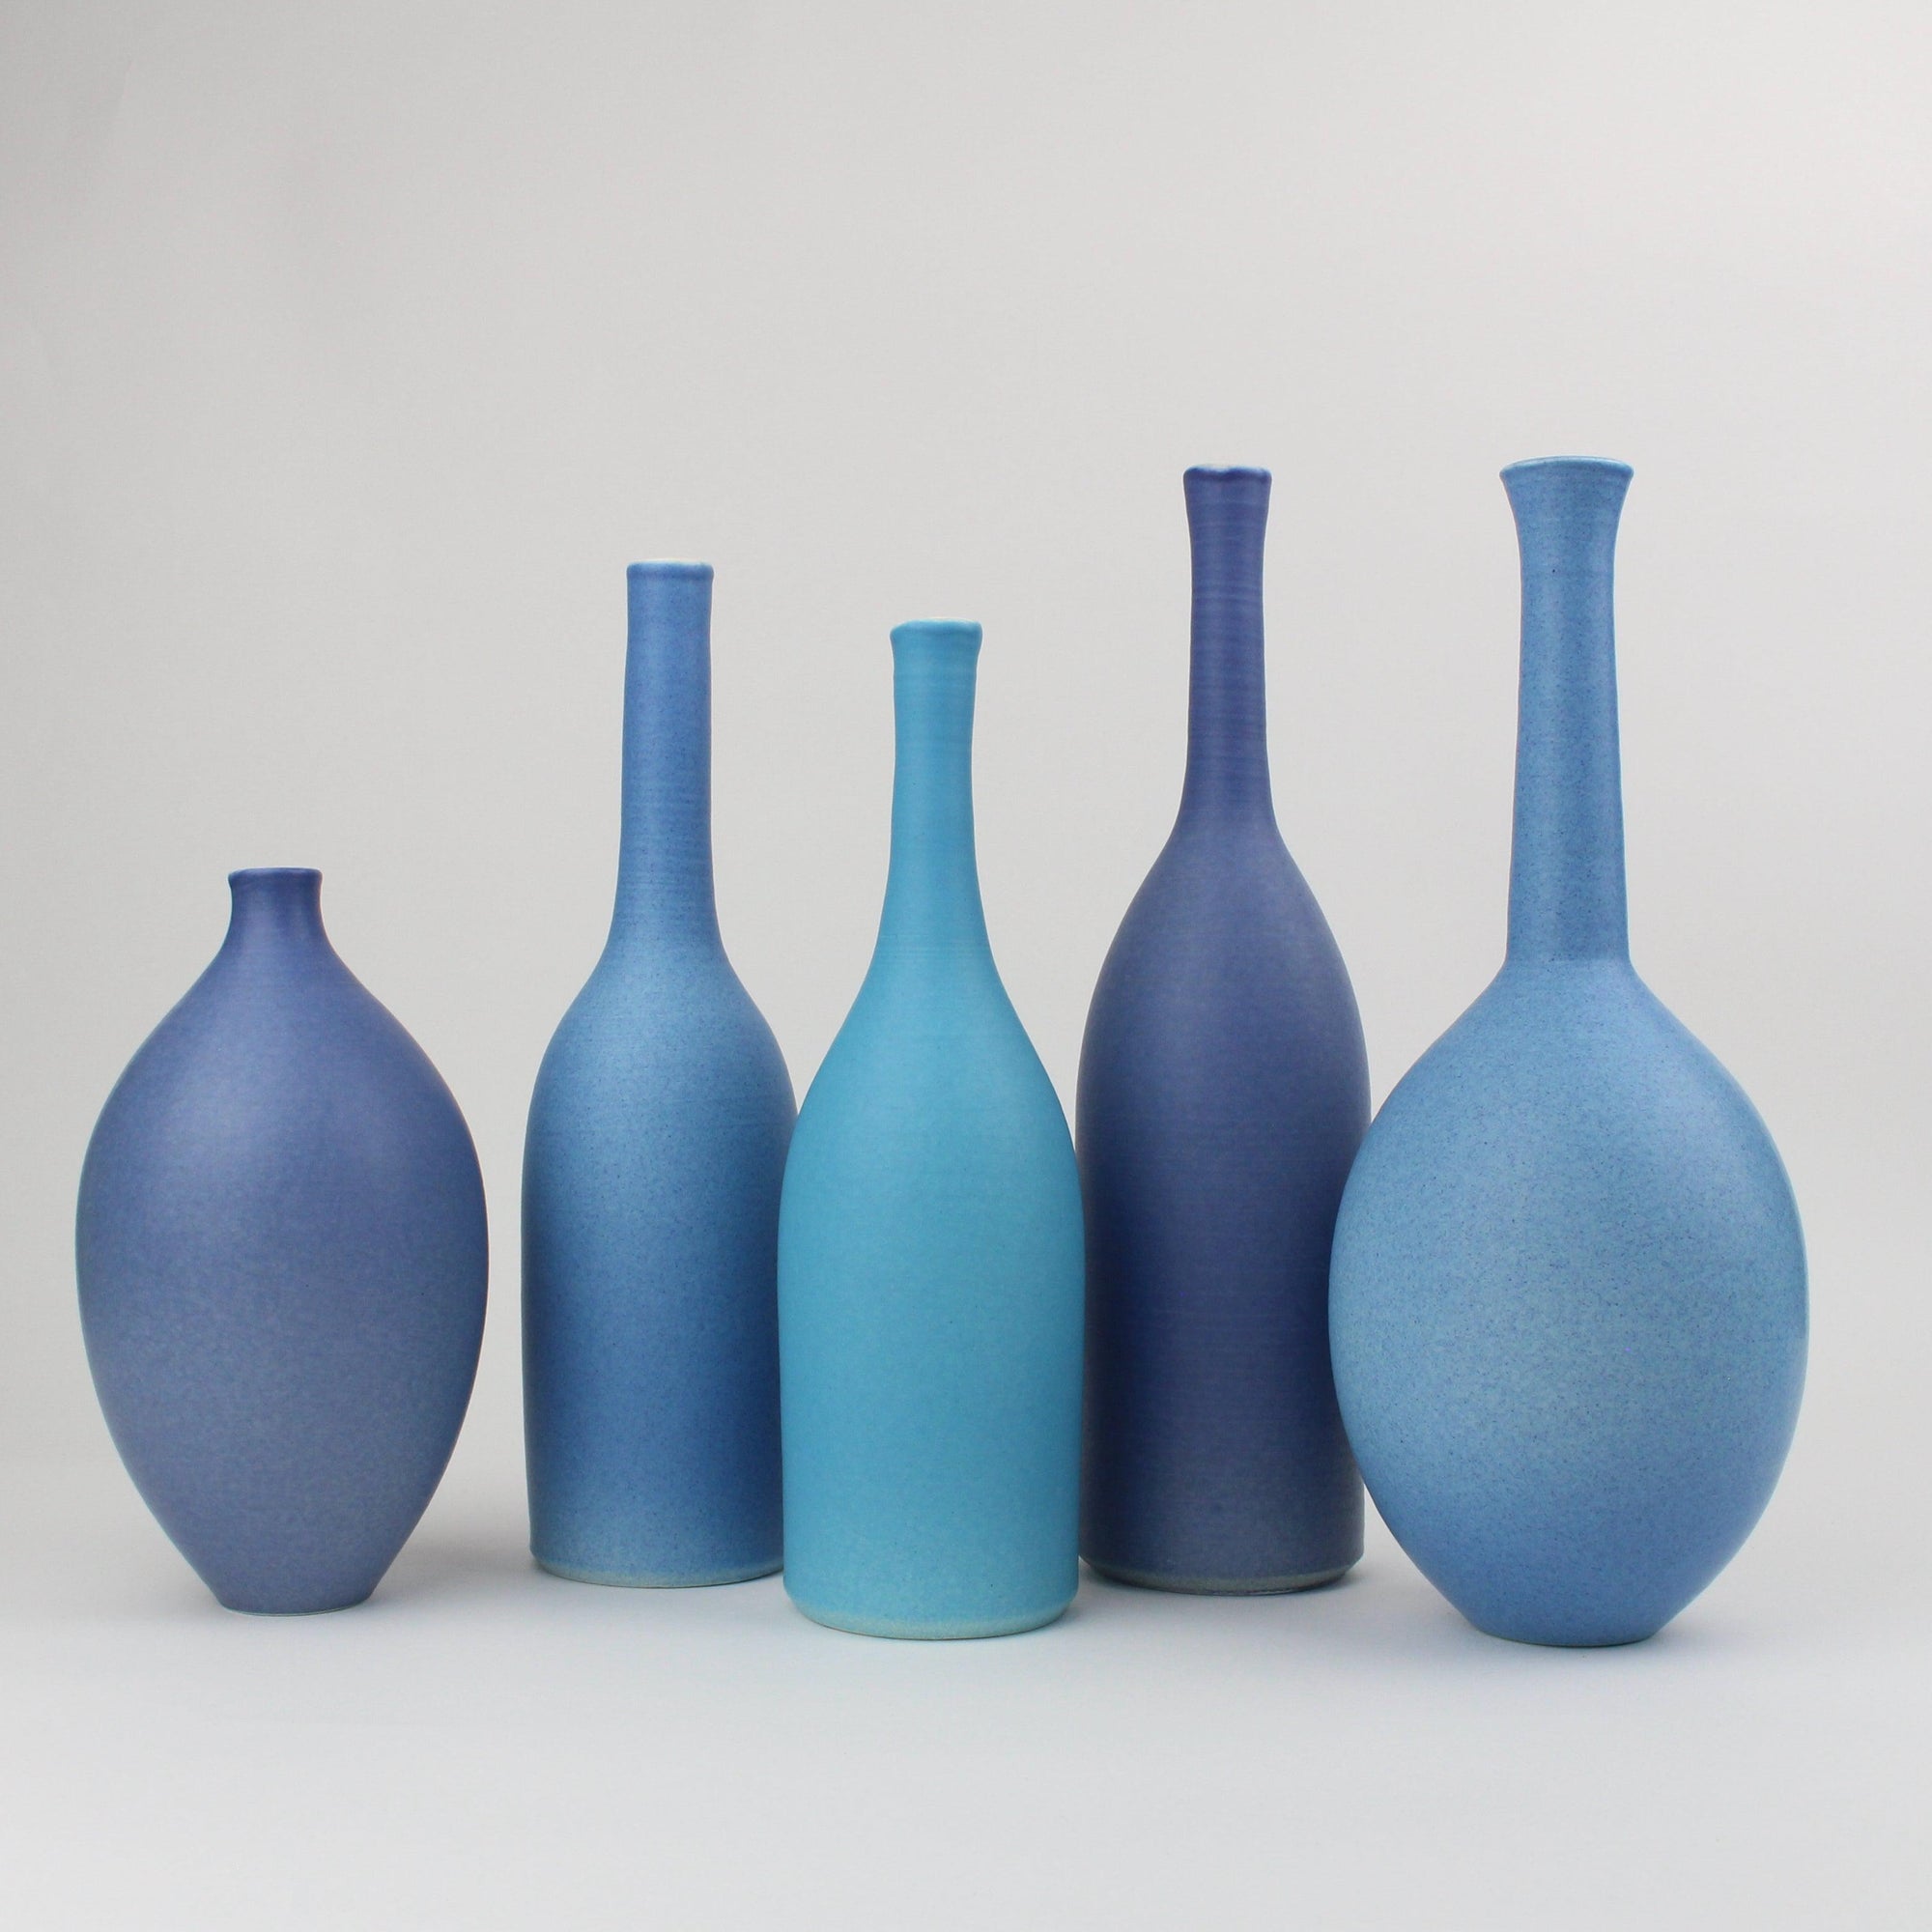 Shades of blue set of bottles by Lucy Burley ceramics, available at Padstow Gallery, Cornwall